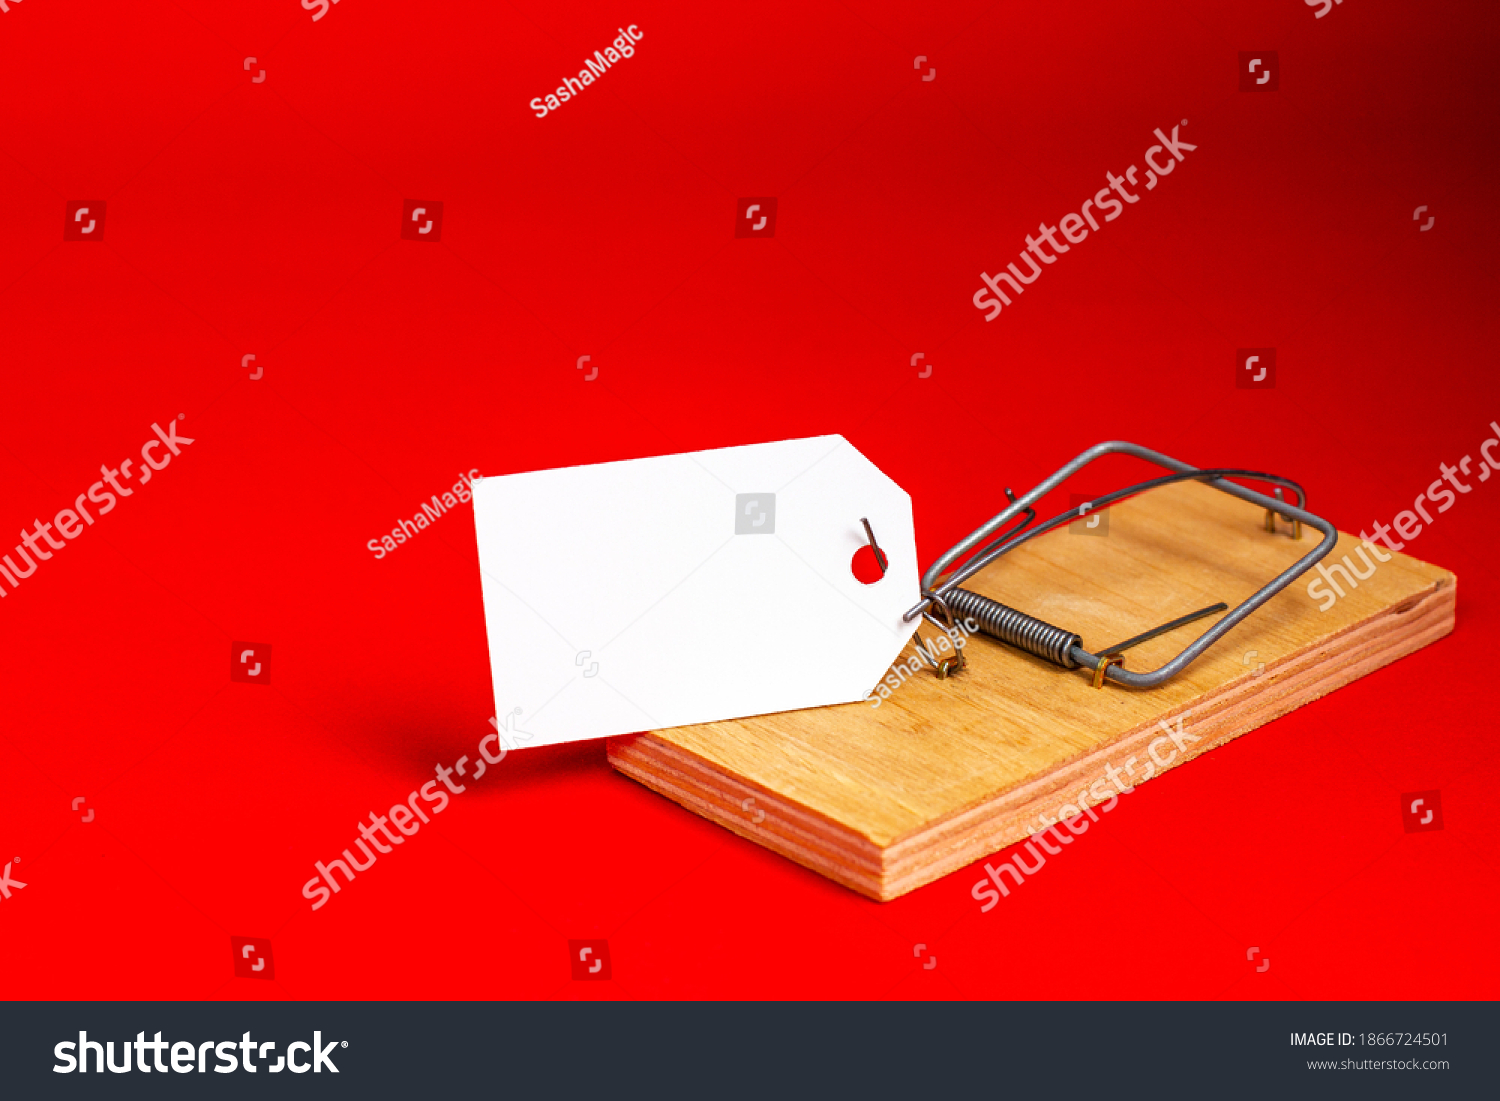 Place for your text, marketing. White paper tag in a wooden mousetrap on a red background. #1866724501